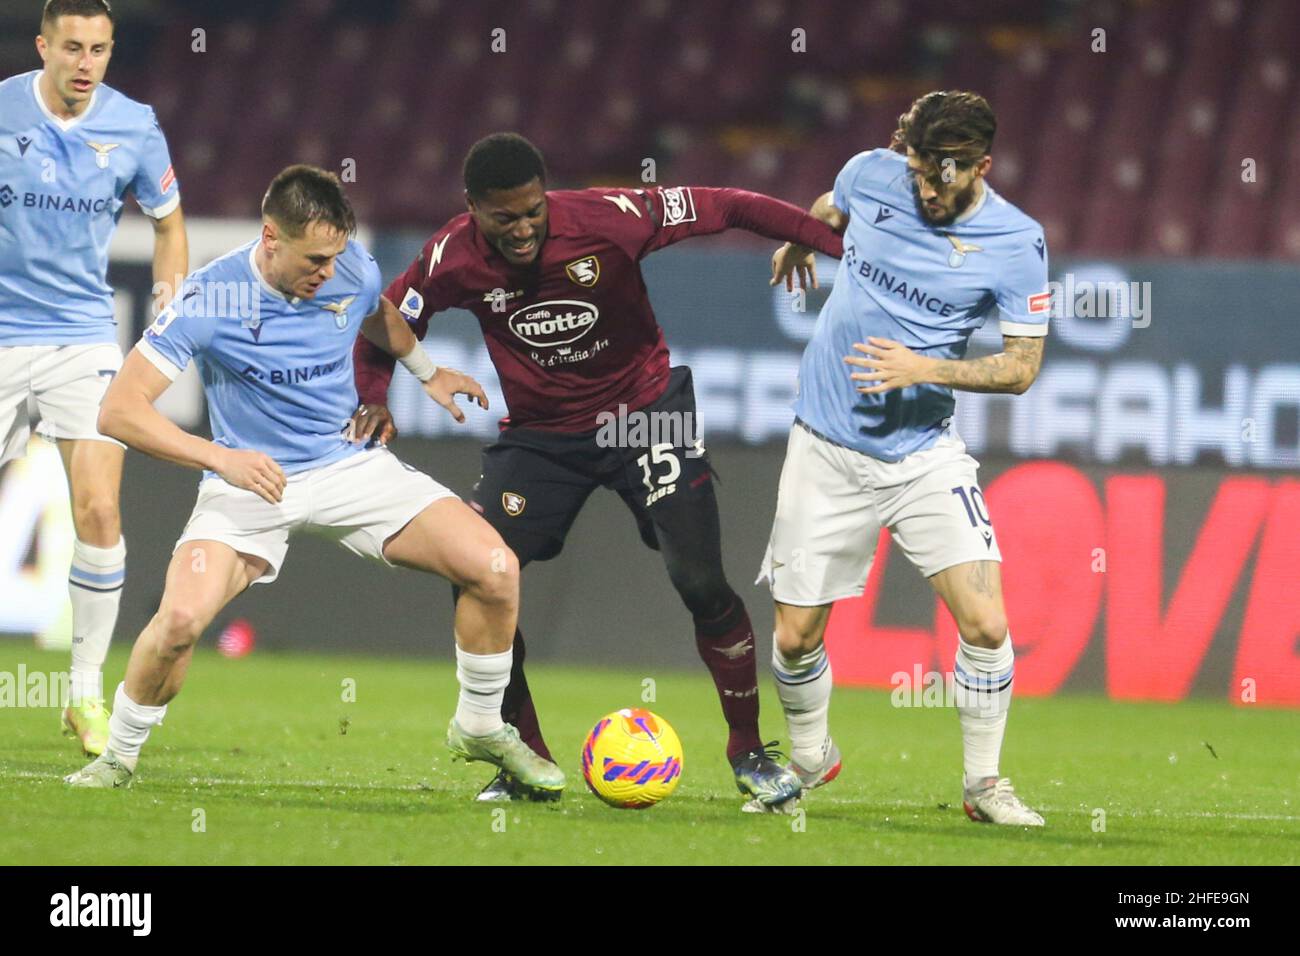 Salernitana's Nigerian forward Simy challenges for the ball with Lazio's Spanish defender Patric (L) and Lazio’s Spanish midfielder Luis Alberto (R) during the Serie A football match between Salernitana and SS Lazio at the Arechi Stadium in Salerno, southern Italy, on January 15, 2021. Stock Photo